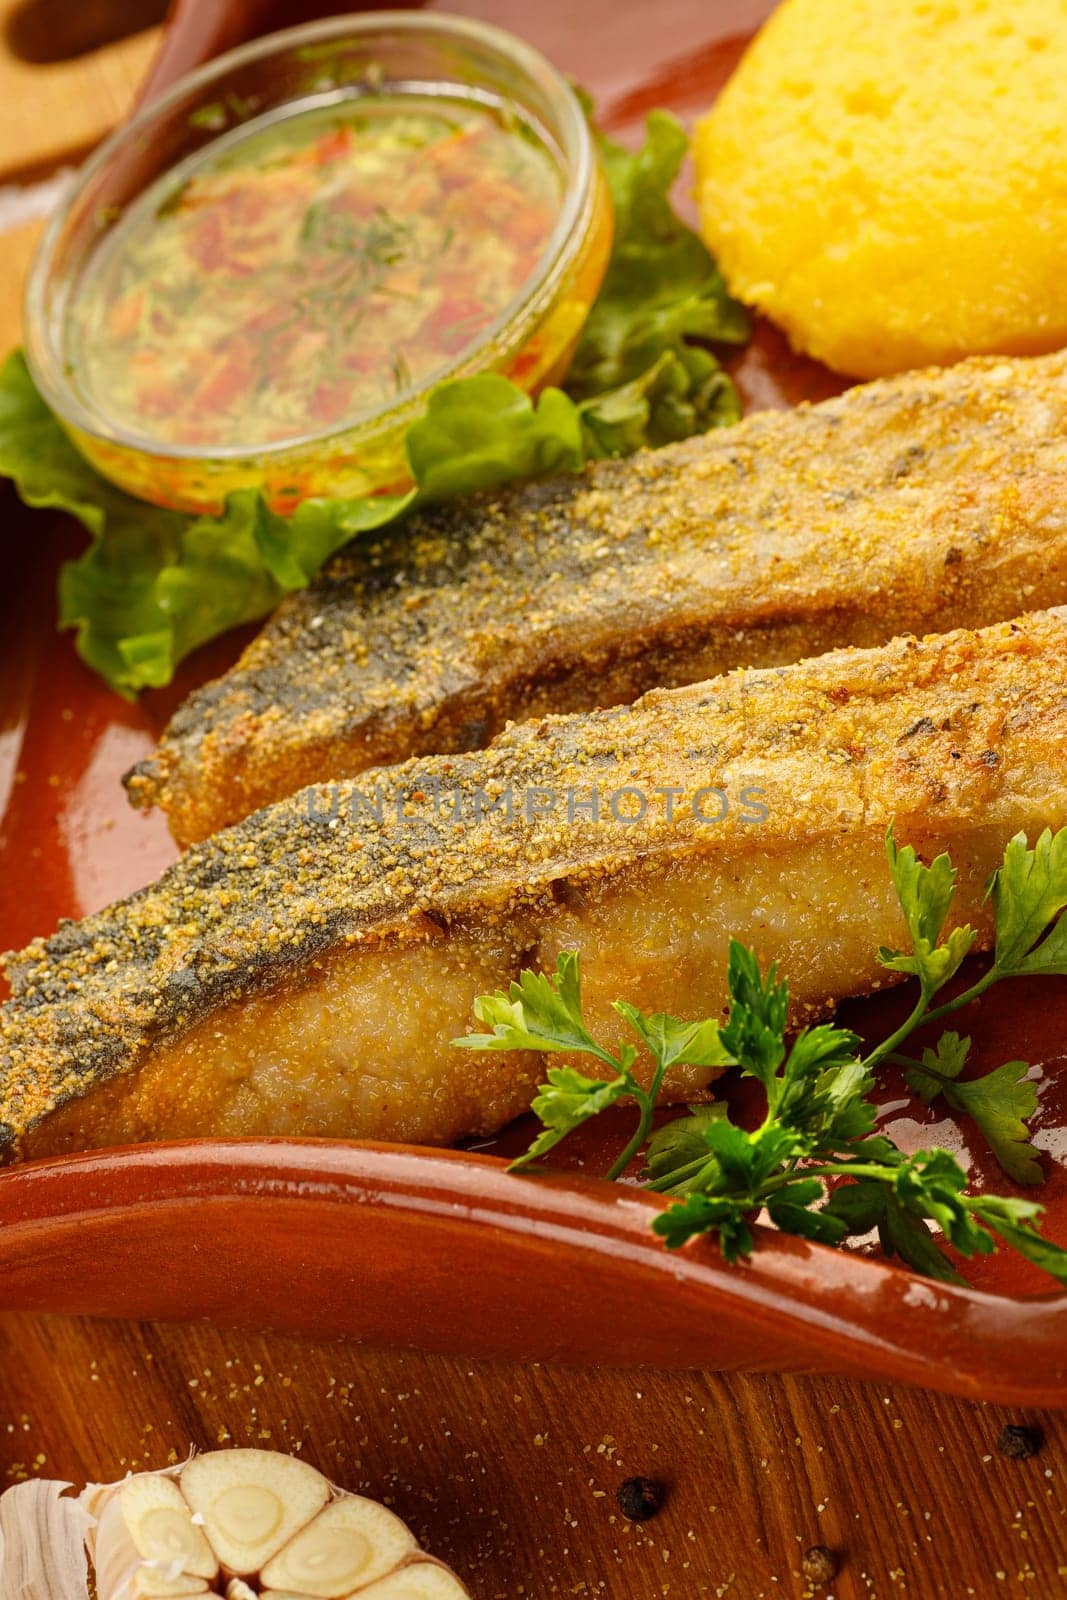 Whole fried fish in a red plate served with mamaliga and garlic souce